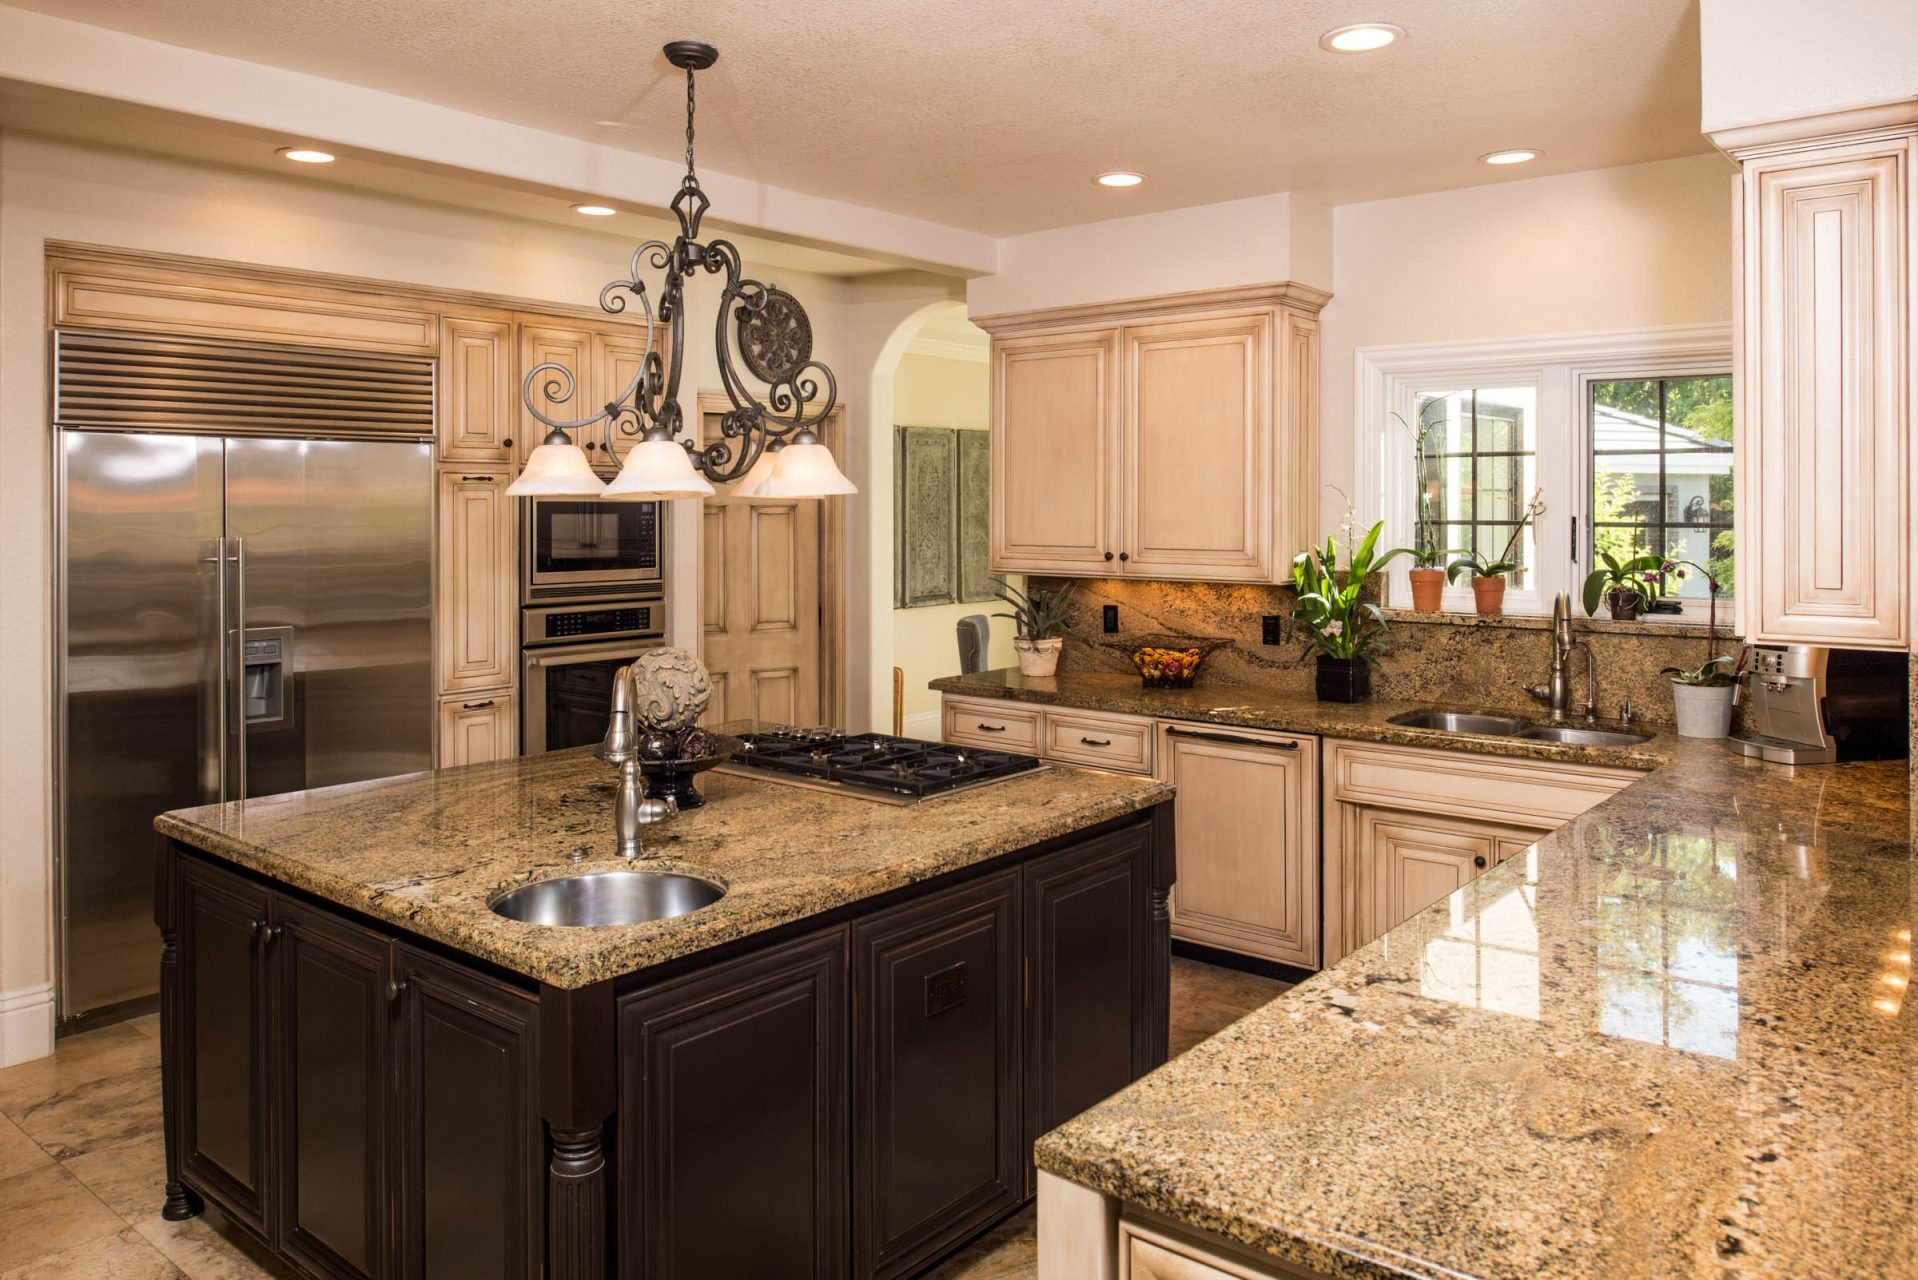 Kitchen Remodels Ideas Pictures
 Building Pros Home Remodeling Experts in Danville CA